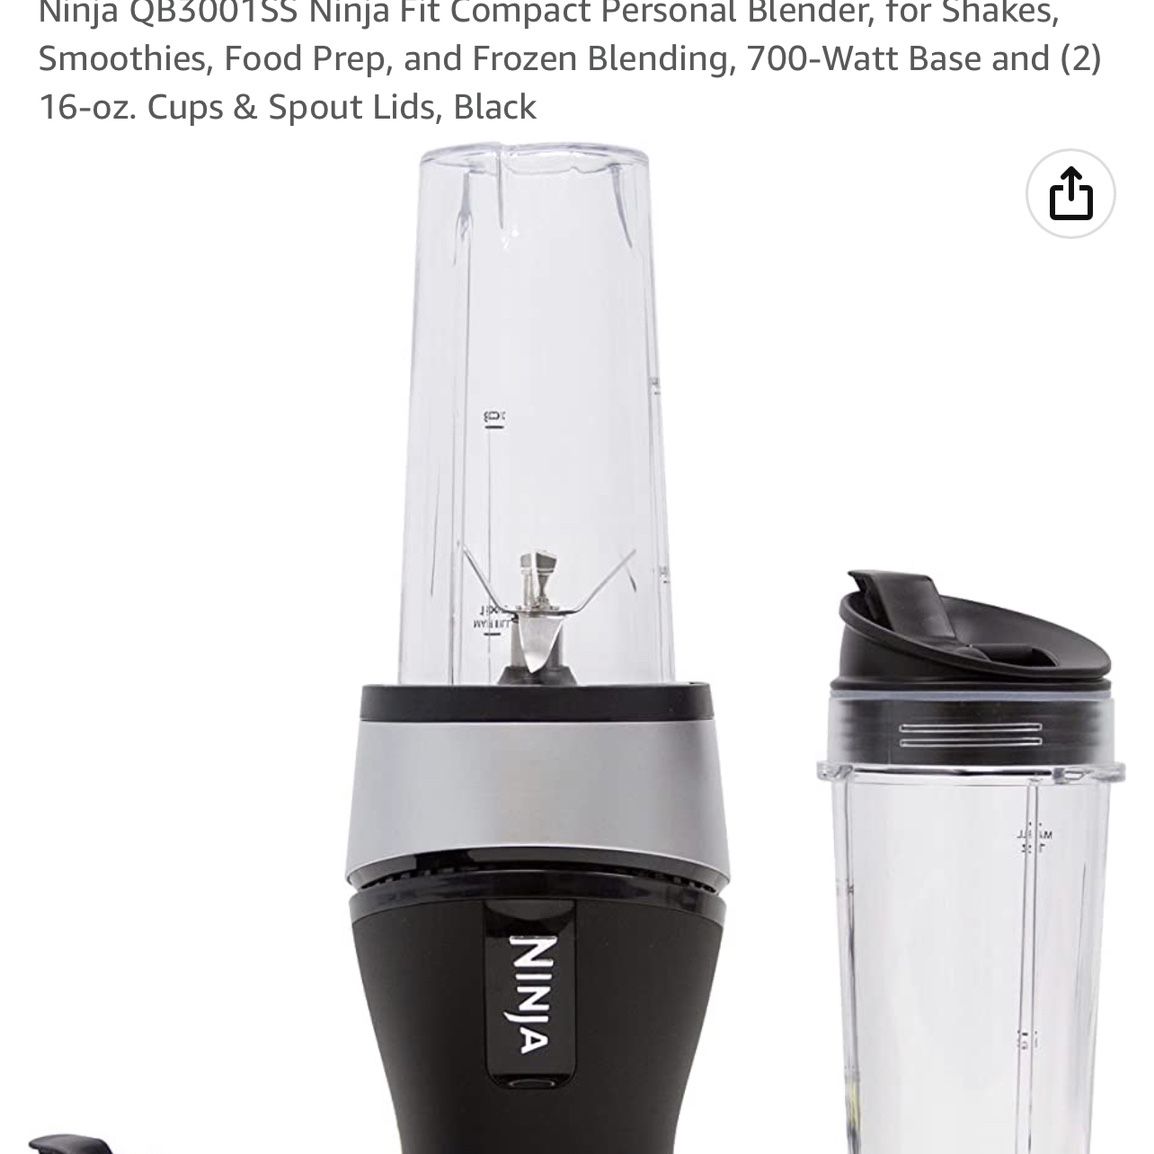 Ninja QB3001SS Ninja Fit Compact Personal Blender, for Shakes, Smoothies,  Food Prep, and Frozen Blending, 700-Watt Base and (2) 16-oz. Cups & Spout  Lids, Black in 2023